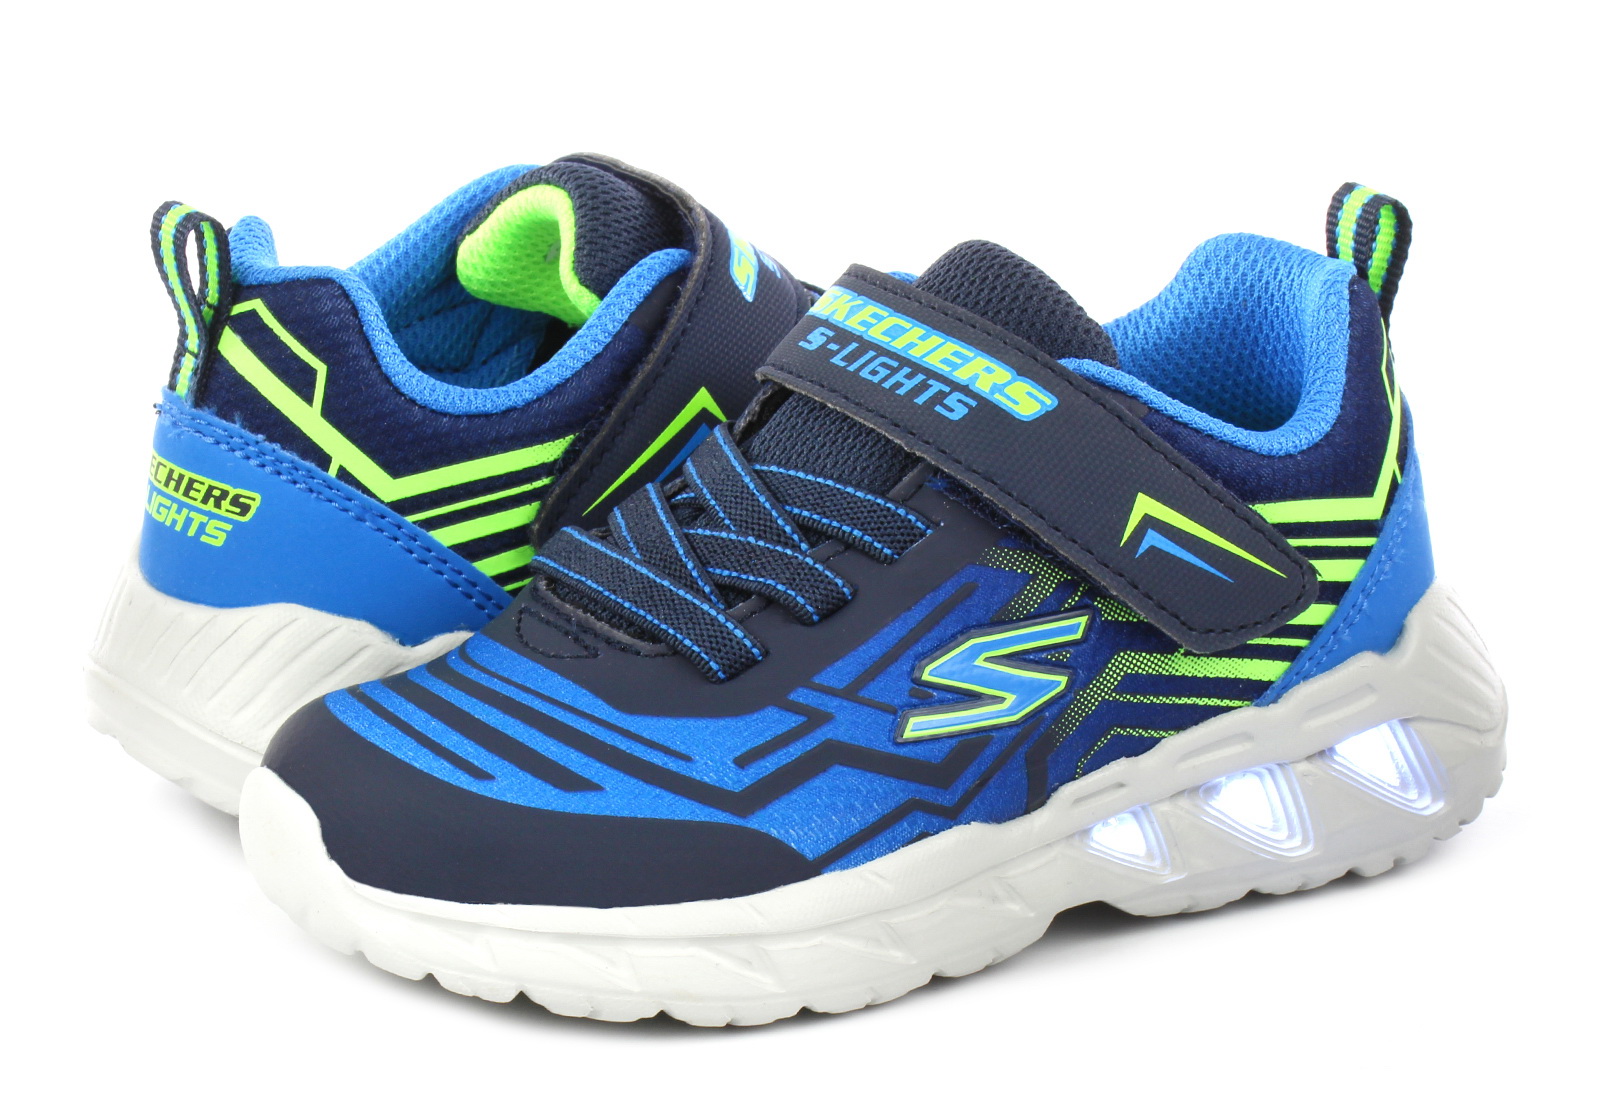 Skechers Shoes - Magna-lights - 401500N-NVBL - Online shop for sneakers,  shoes and boots